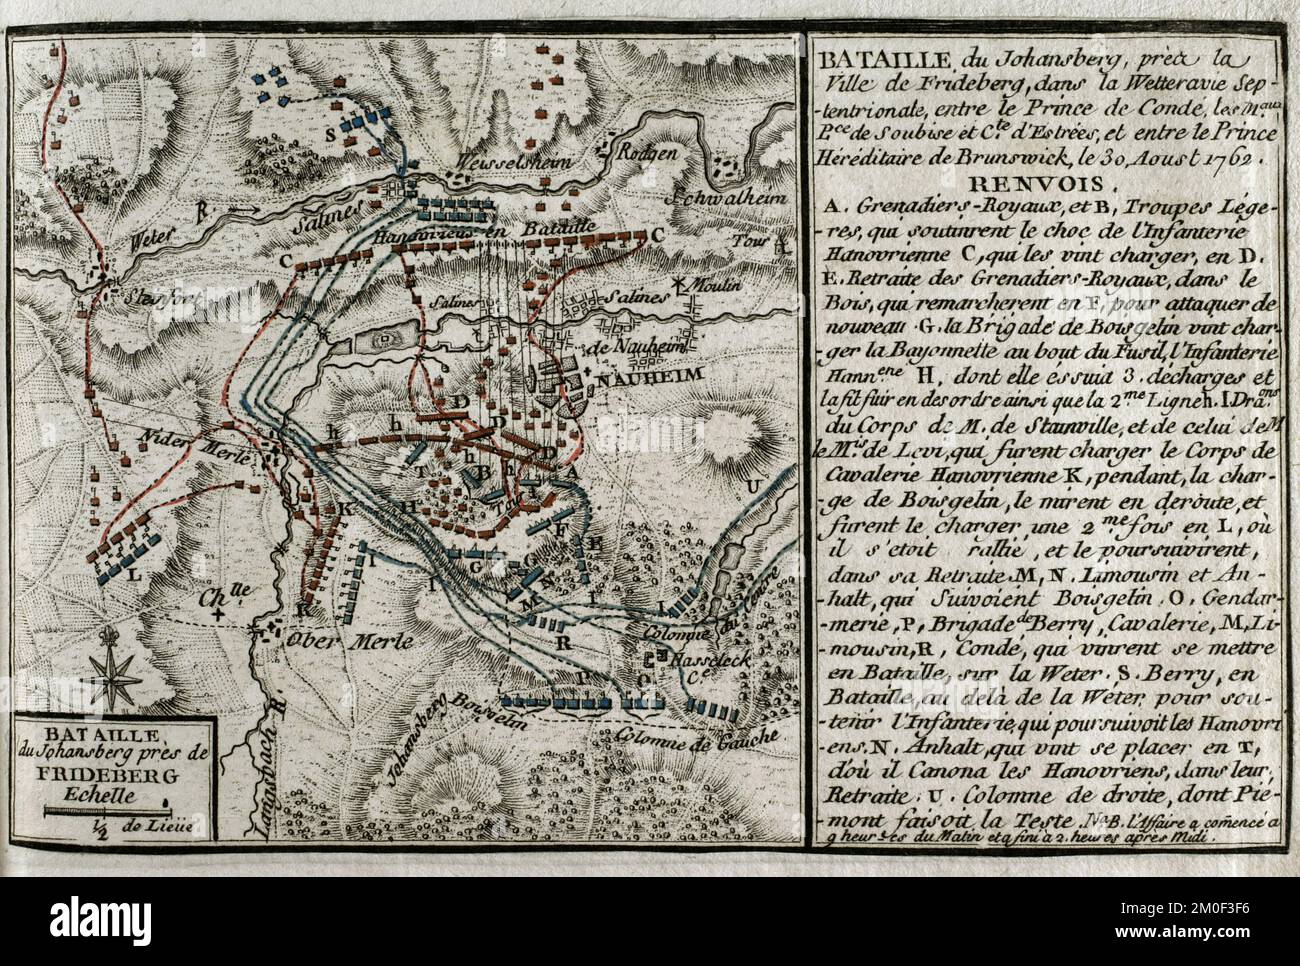 Seven Years War (1756-1763). Map of the Battle of Johannisberg, 1762 (August 30, 1762). French forces led by Louis Joseph, Prince of Conde, defeated Hanoverian and British army under the command of Duke Ferdinand of Brunswick. Published in 1765 by the cartographer Jean de Beaurain (1696-1771) as an illustration of his Great Map of Germany, with the events that took place during the Seven Years War. Allied army in red and the French army in blue. Etching and engraving. French edition, 1765. Military Historical Library of Barcelona (Biblioteca Histórico Militar de Barcelona). Catalonia. Spain. Stock Photo